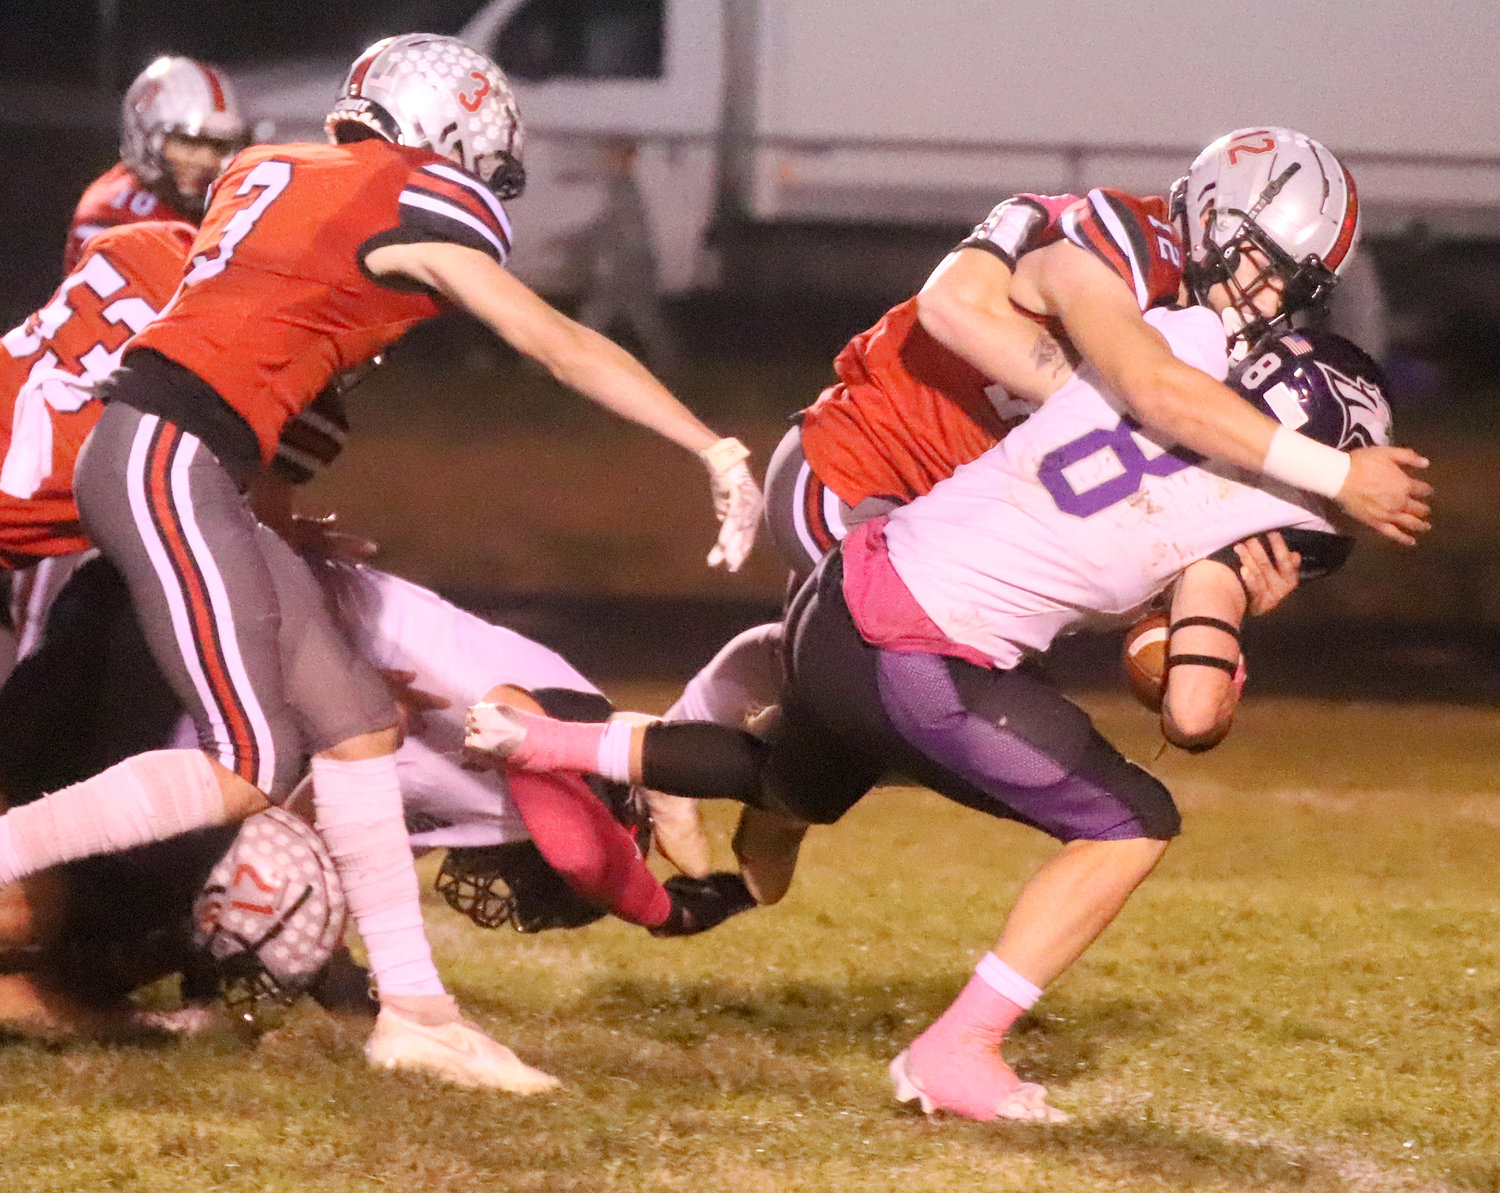 Marcus Guzman wraps up Burlington's Caden Schisel after a gain in the first half of the Bloodhounds' win Friday.